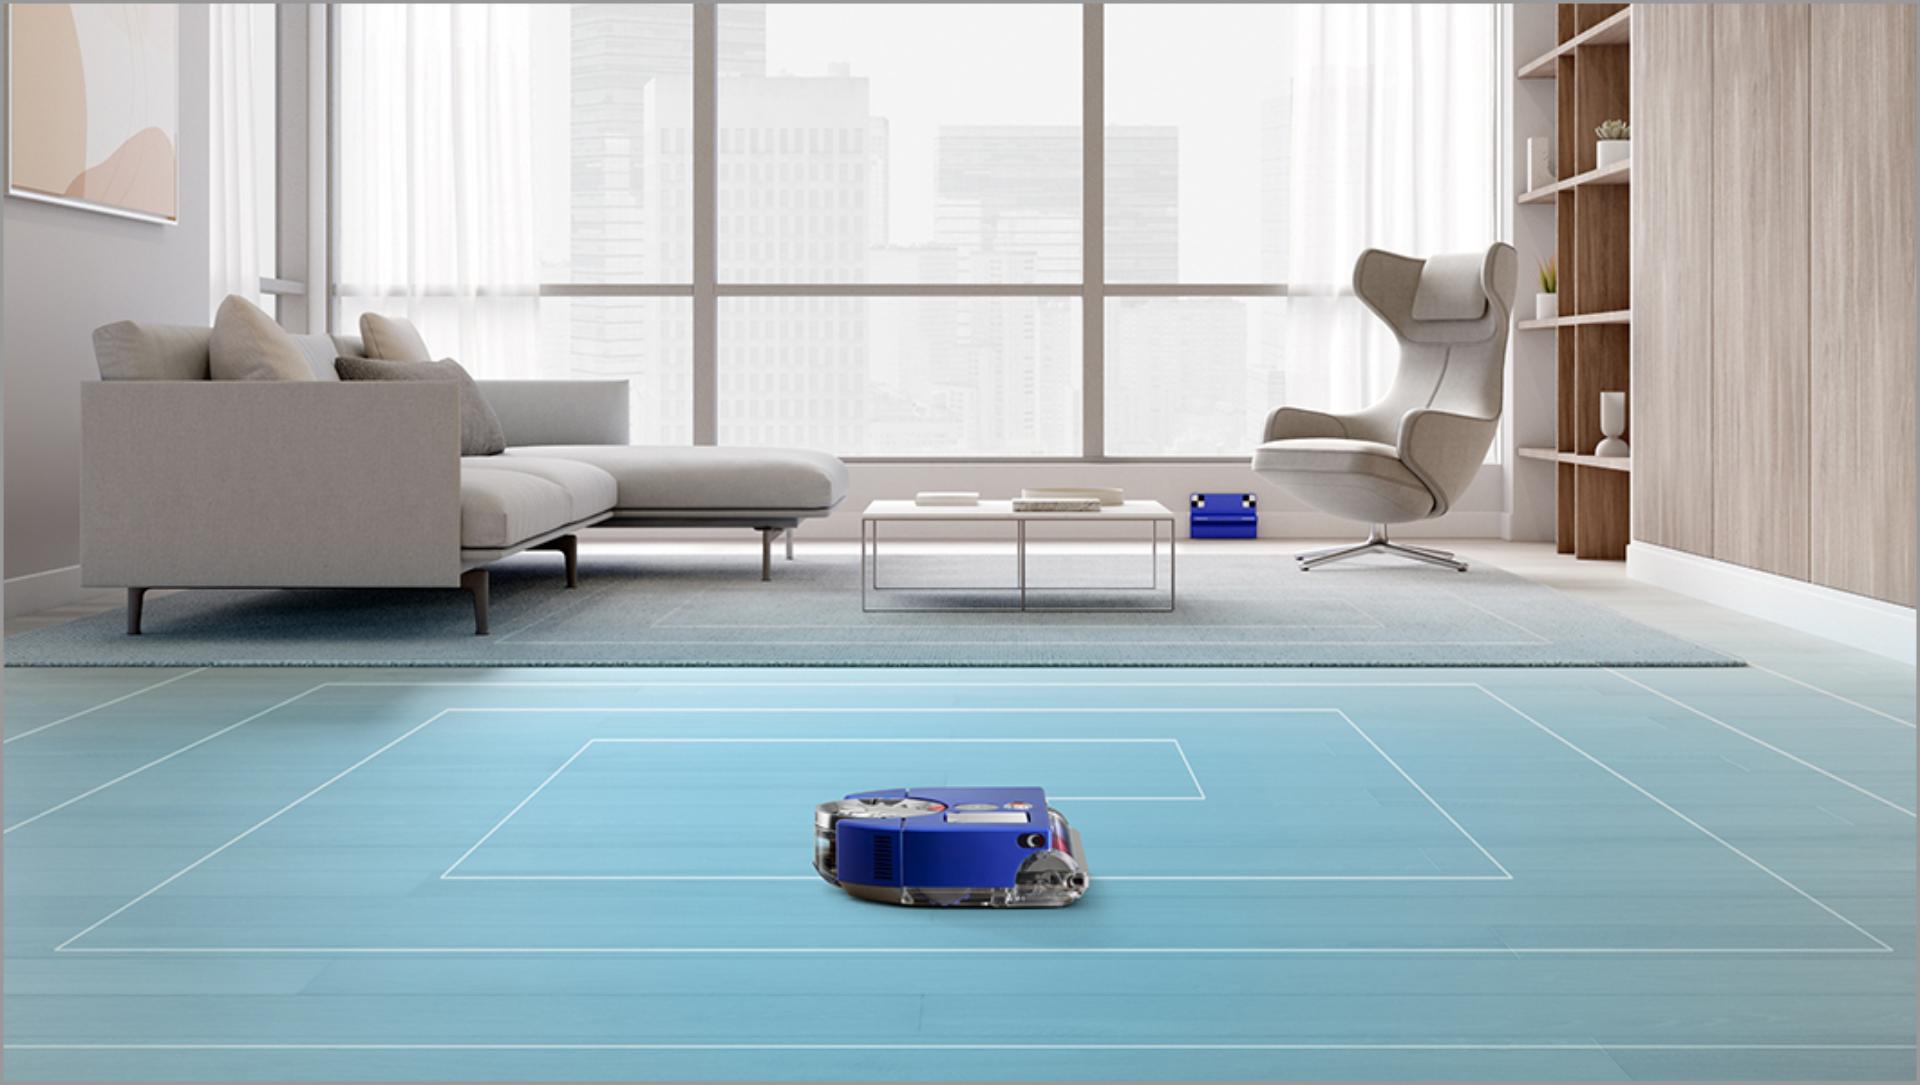 Image showing the Dyson 360 Vis Nav robot's cleaning and mapping pattern